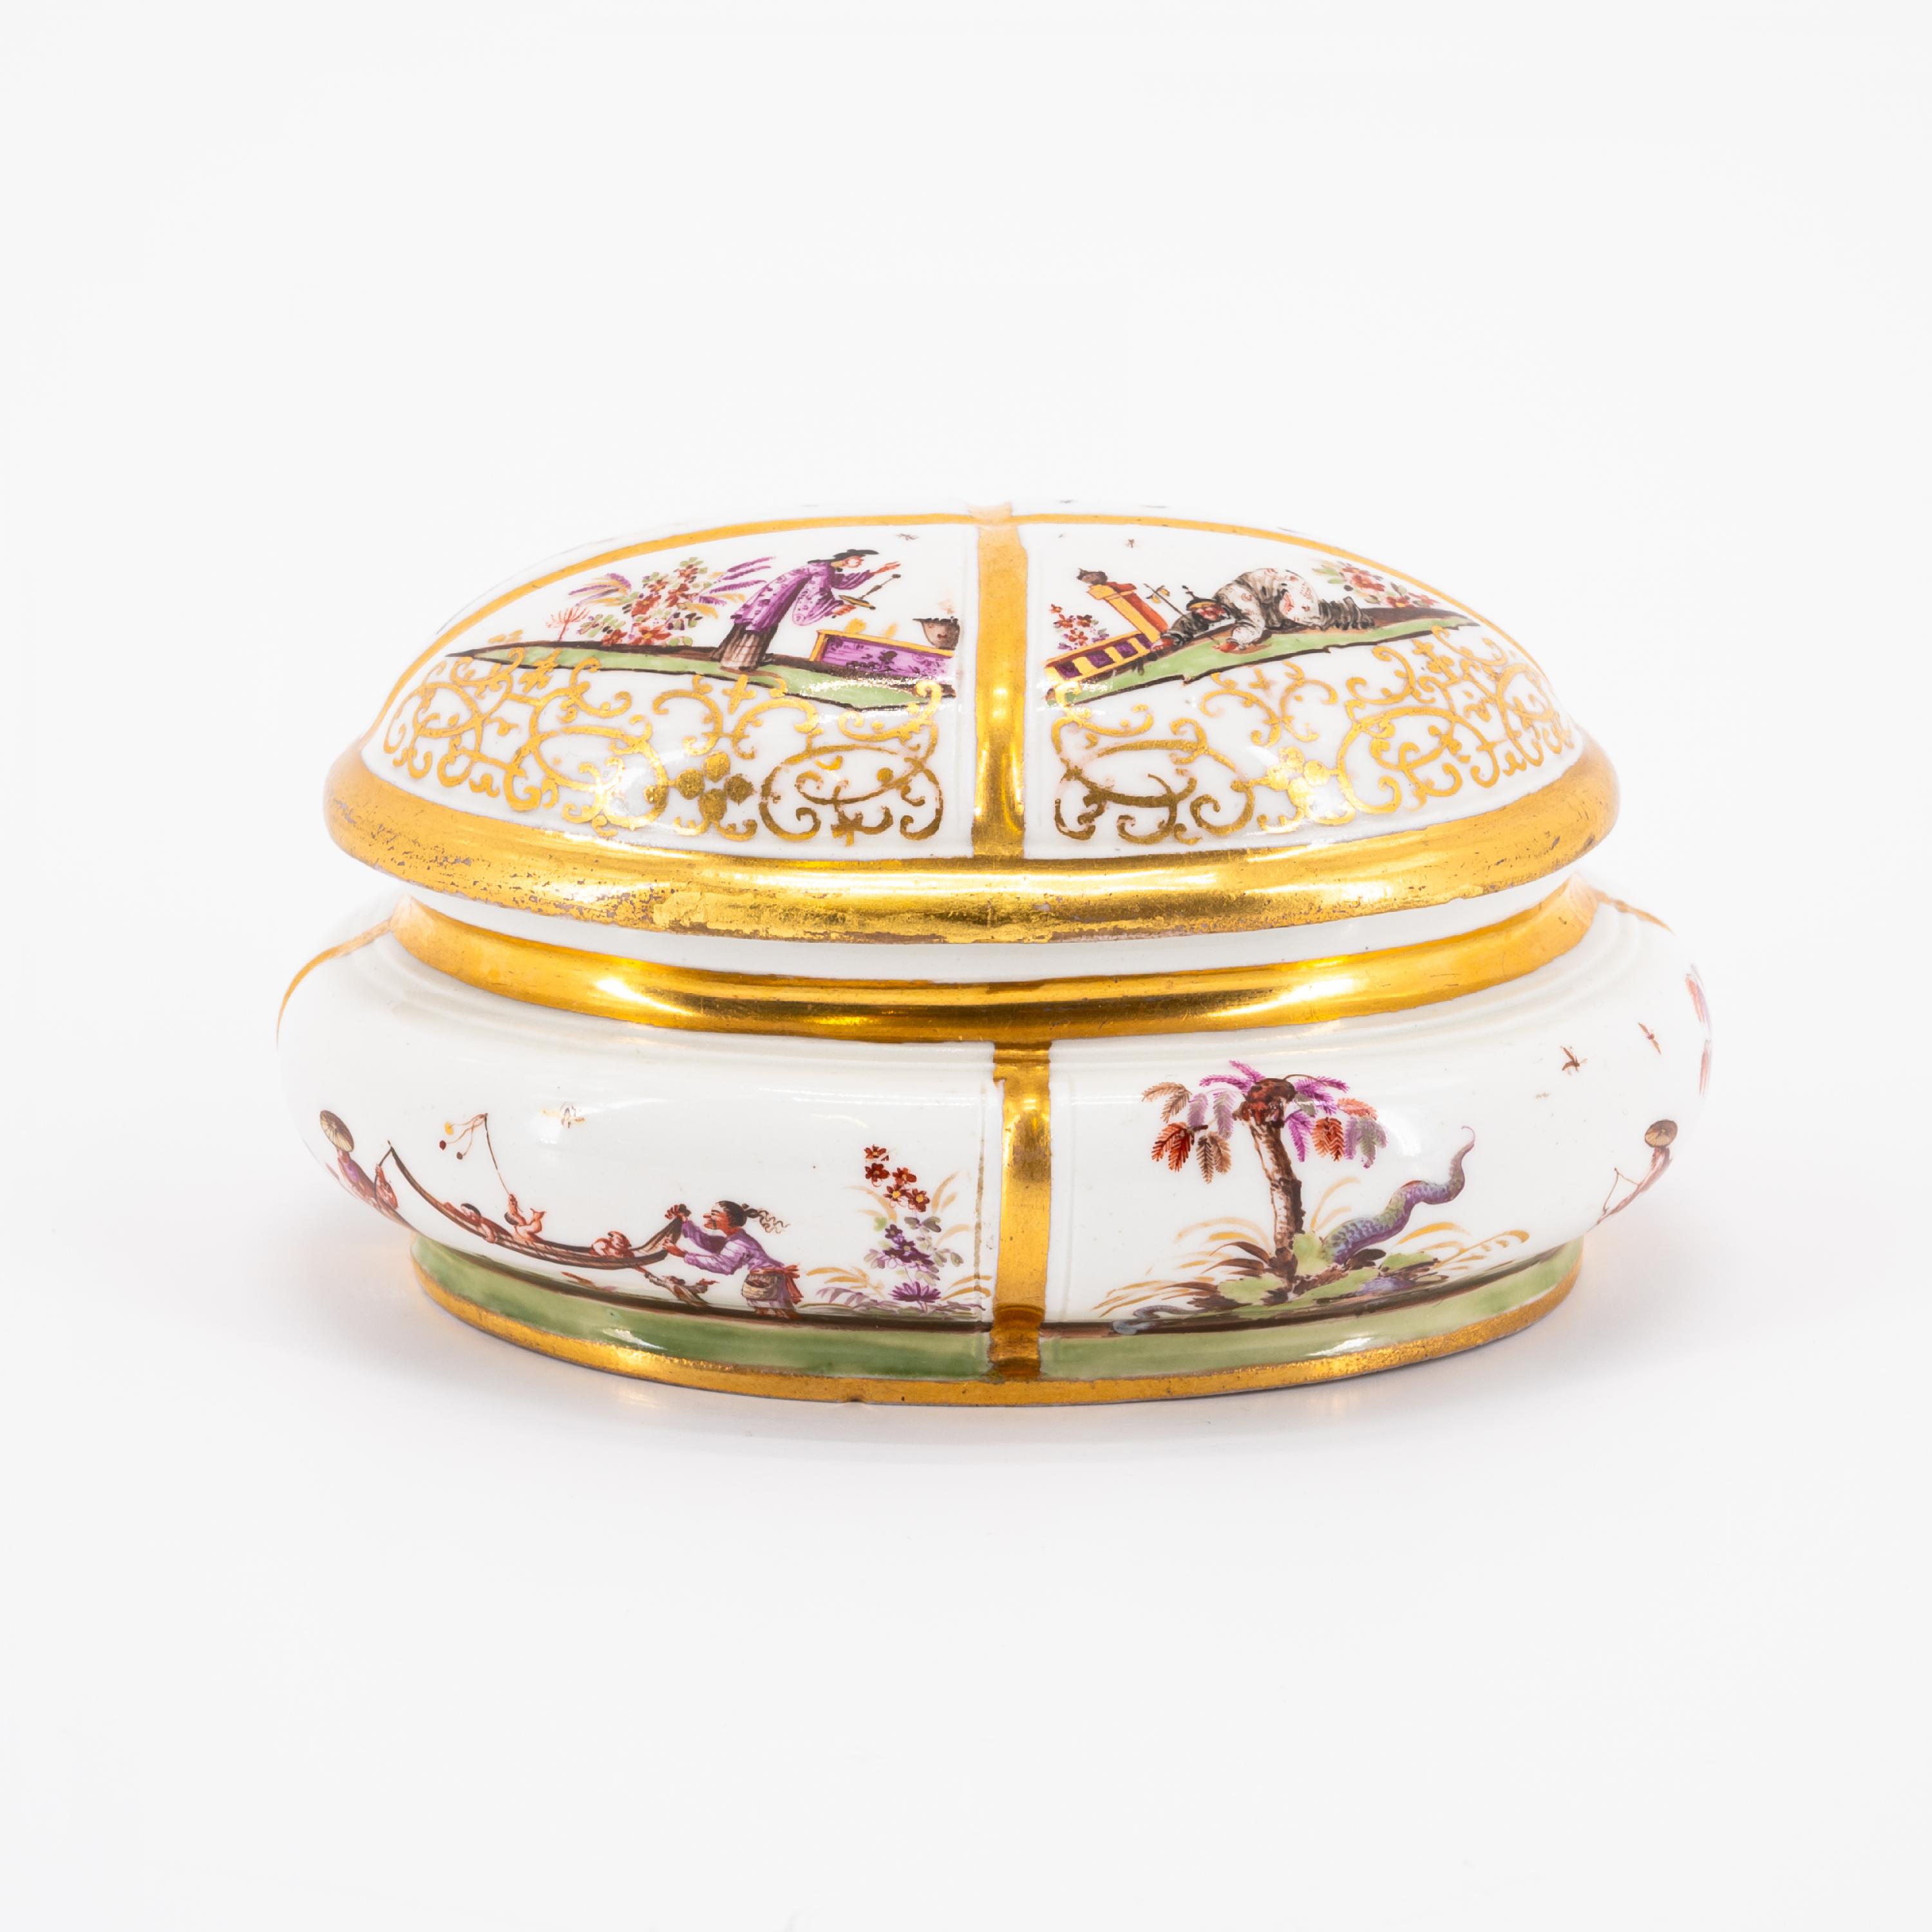 OVAL PORCELAIN SUGAR BOWL WITH CHINOISERIES - Image 4 of 7